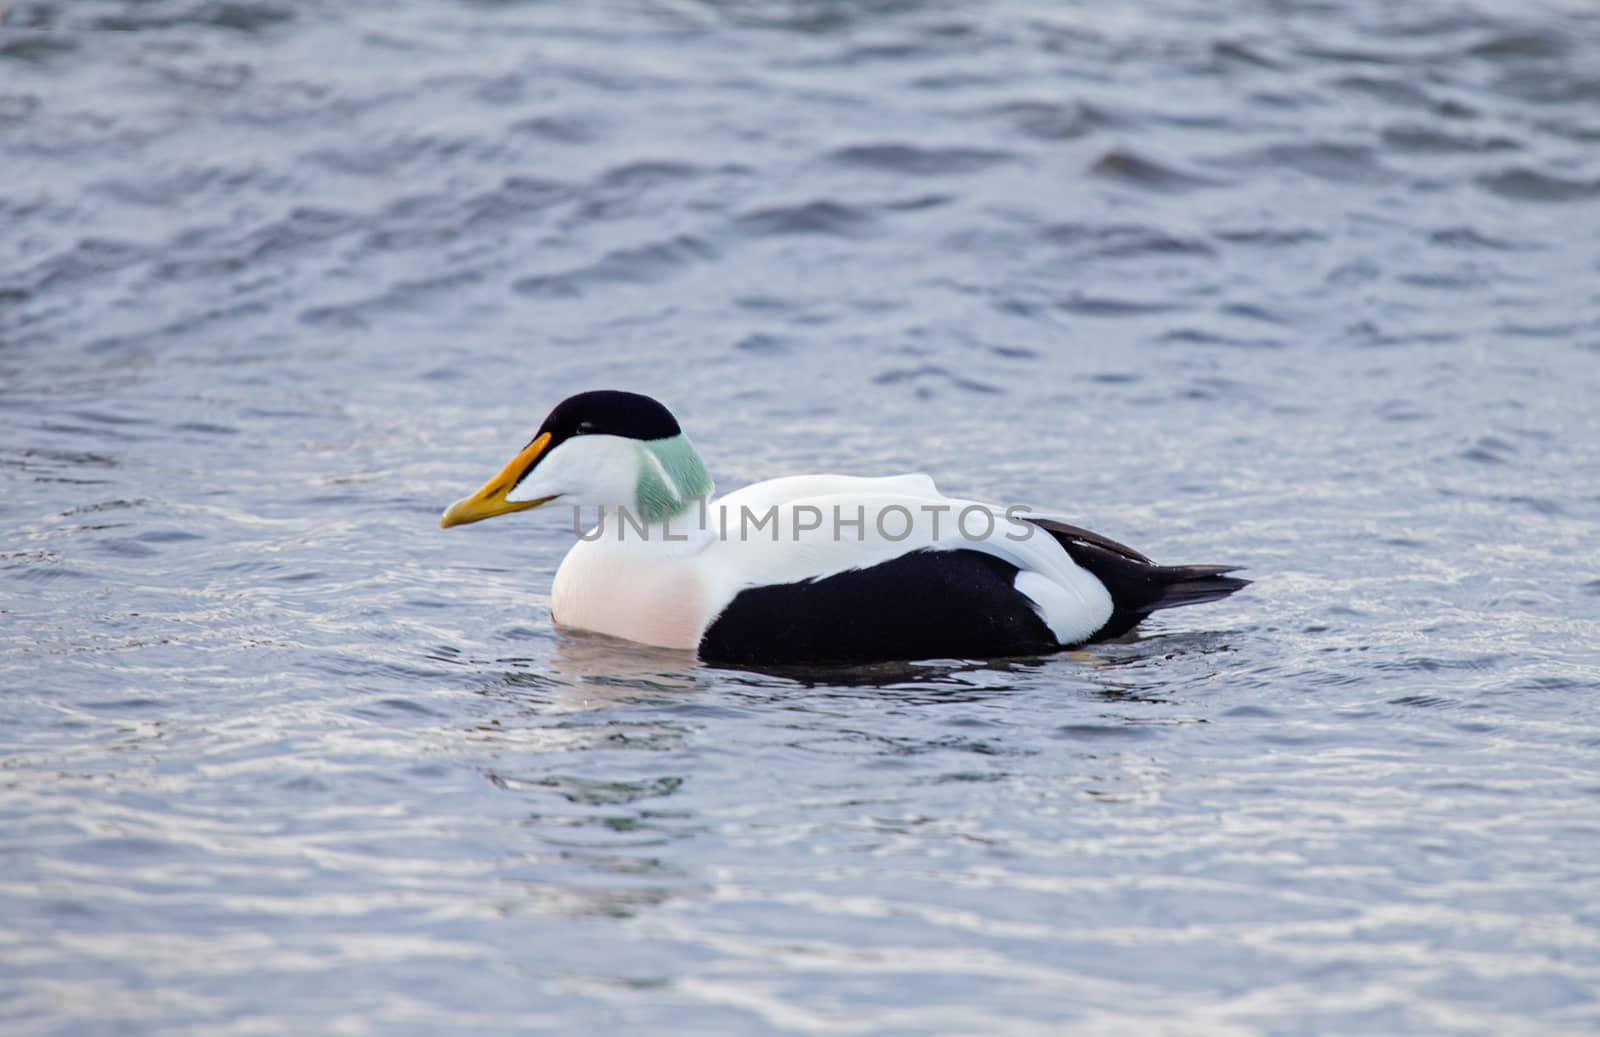 Common eider by thomas_males